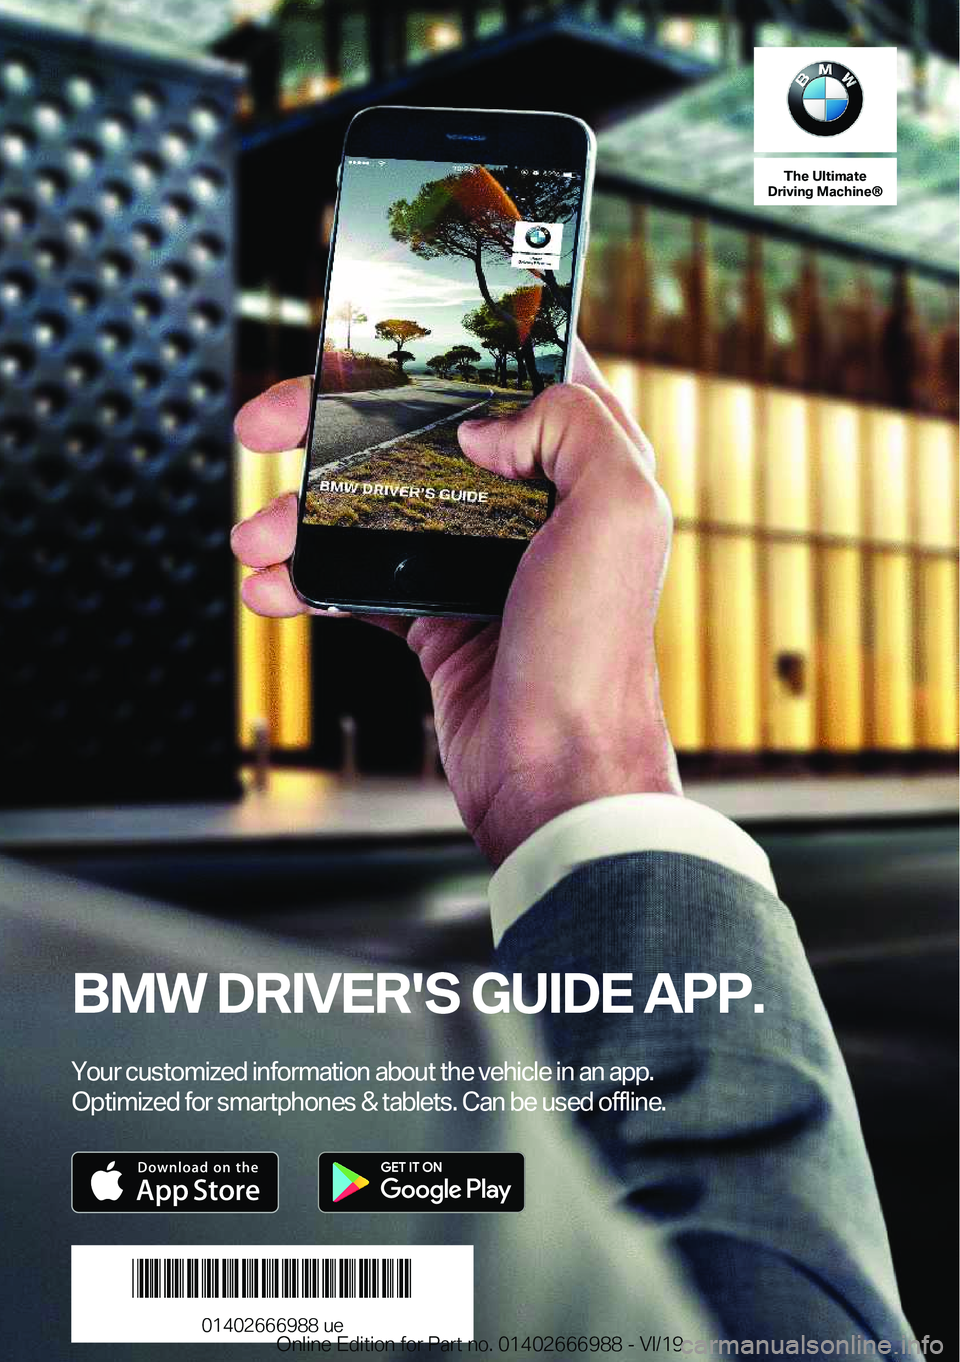 BMW X4 2020  Owners Manual �T�h�e��U�l�t�i�m�a�t�e
�D�r�i�v�i�n�g��M�a�c�h�i�n�e�n
�B�M�W��D�R�I�V�E�R�'�S��G�U�I�D�E��A�P�P�.
�Y�o�u�r��c�u�s�t�o�m�i�z�e�d��i�n�f�o�r�m�a�t�i�o�n��a�b�o�u�t��t�h�e��v�e�h�i�c�l�e�